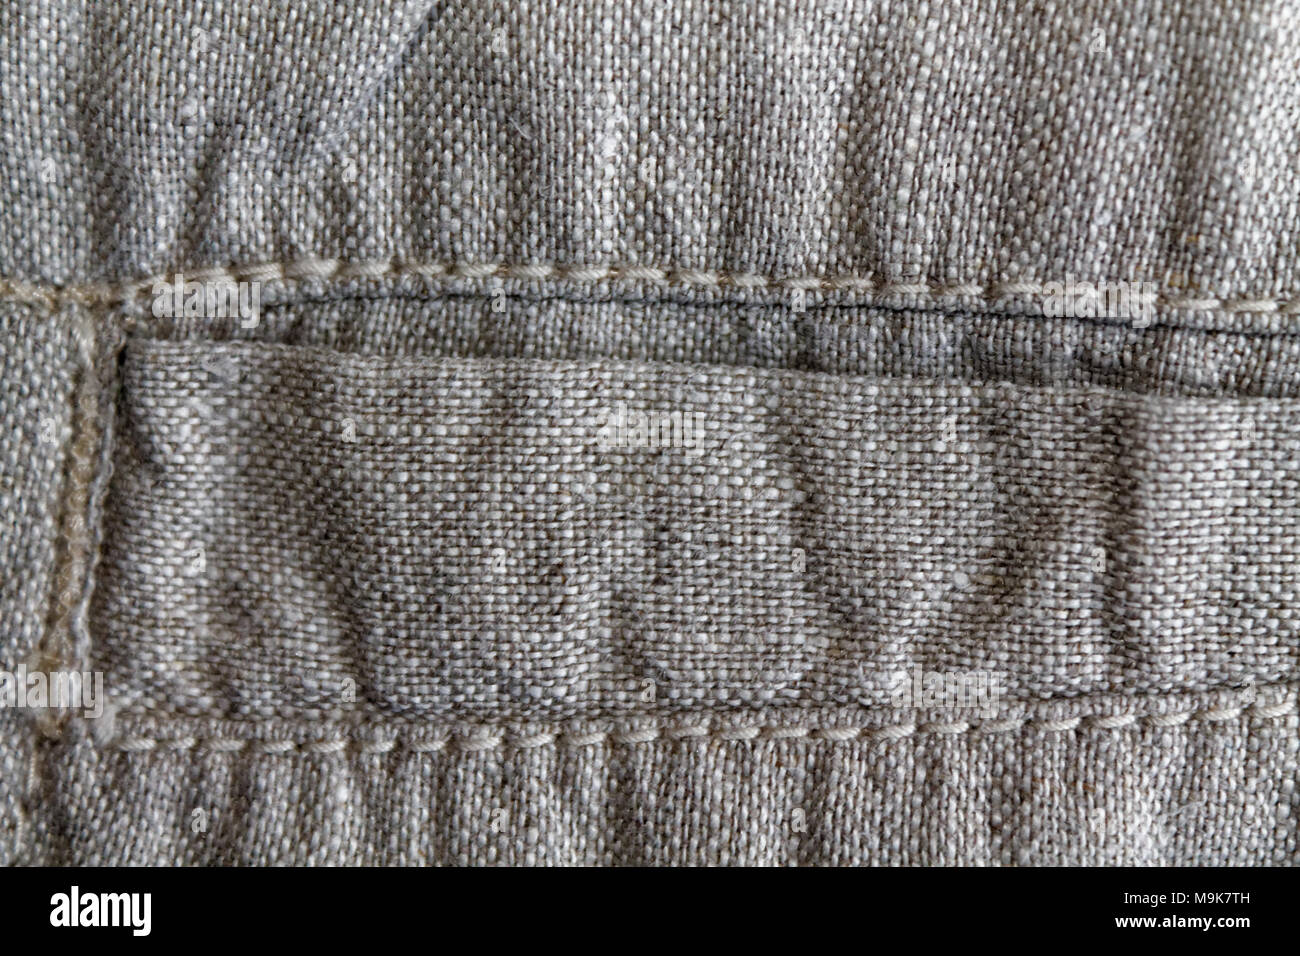 Linen natural texture or background for web site or mobile devices Stock Photo